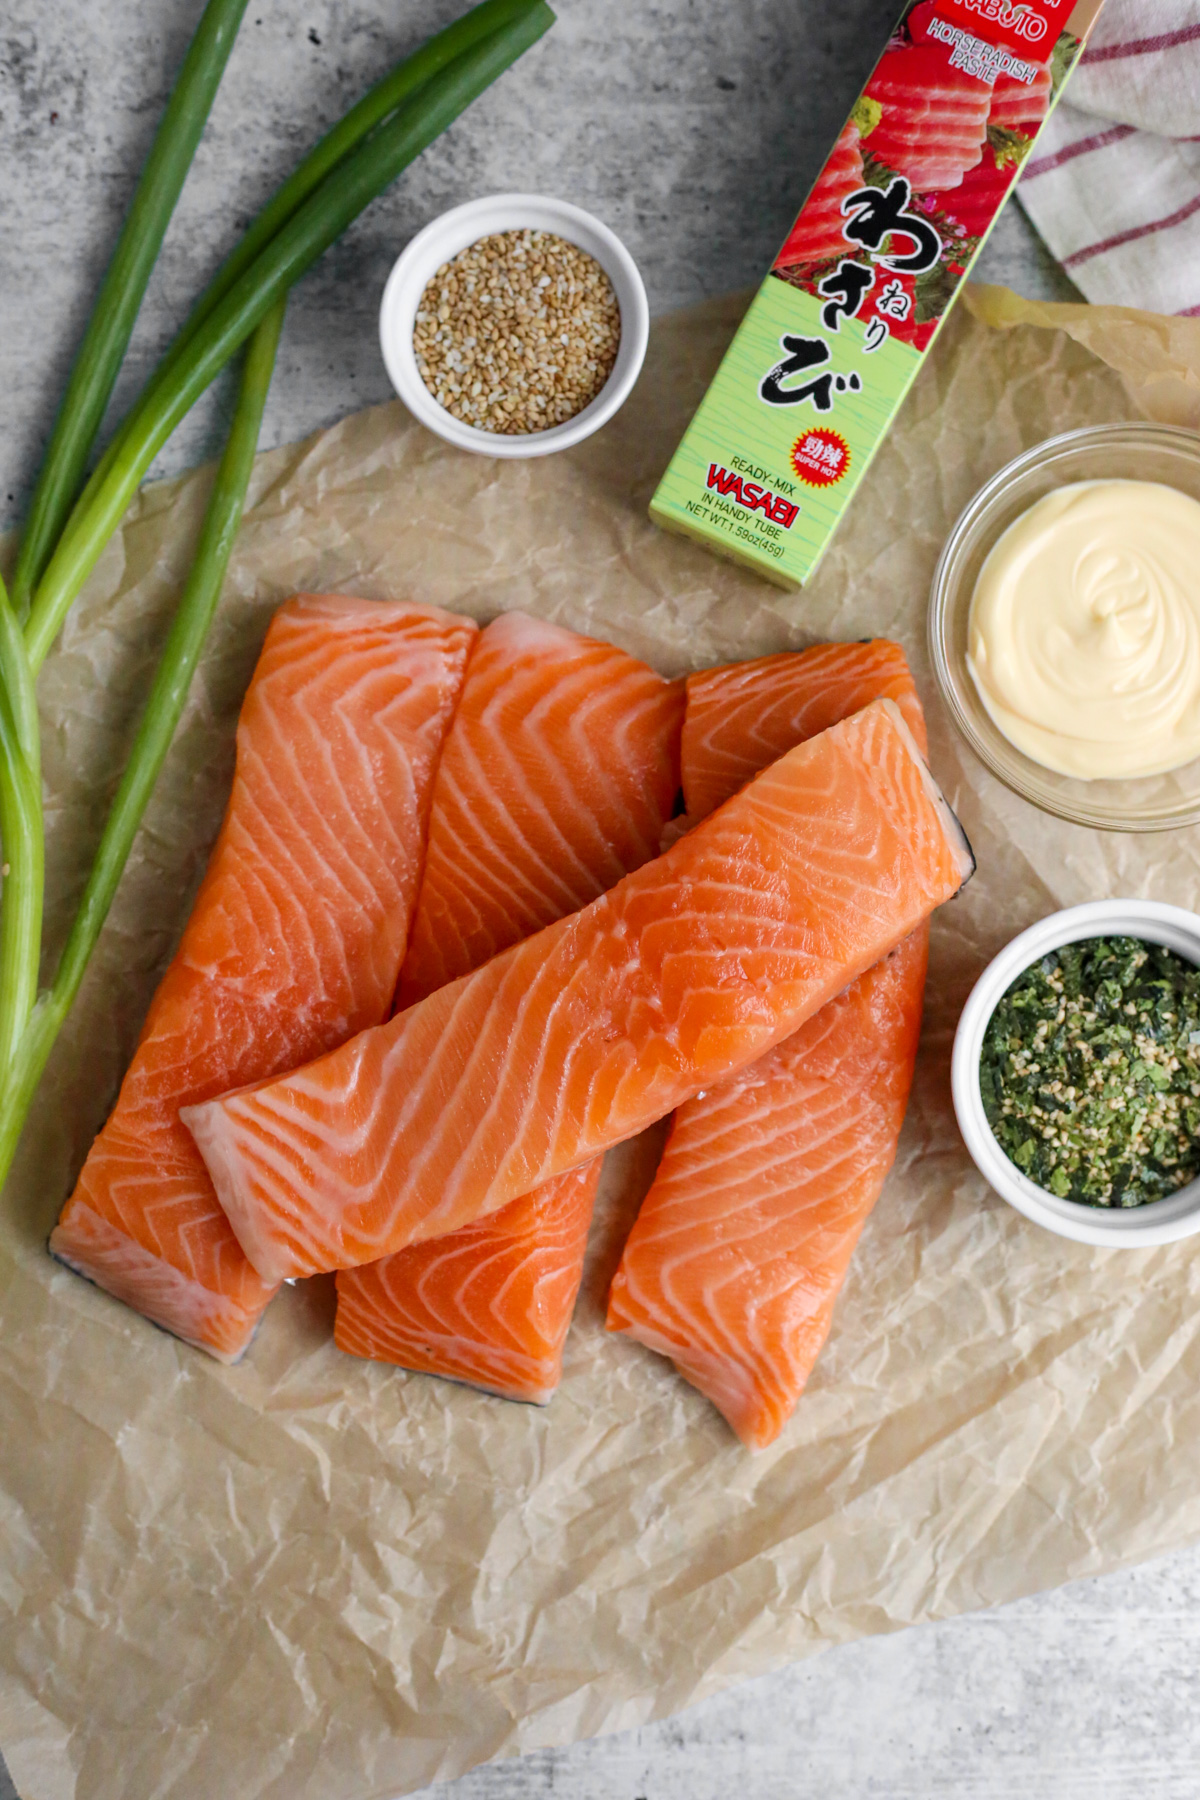 Flatlay style image with the ingredients for this salmon recipe, including four sliced, skin-on salmon fillets, green onions, a ramekin with sesame seeds, a ramekin with Furikake, an unopened tube of wasabi paste, and small glass dish with mayonnaise 